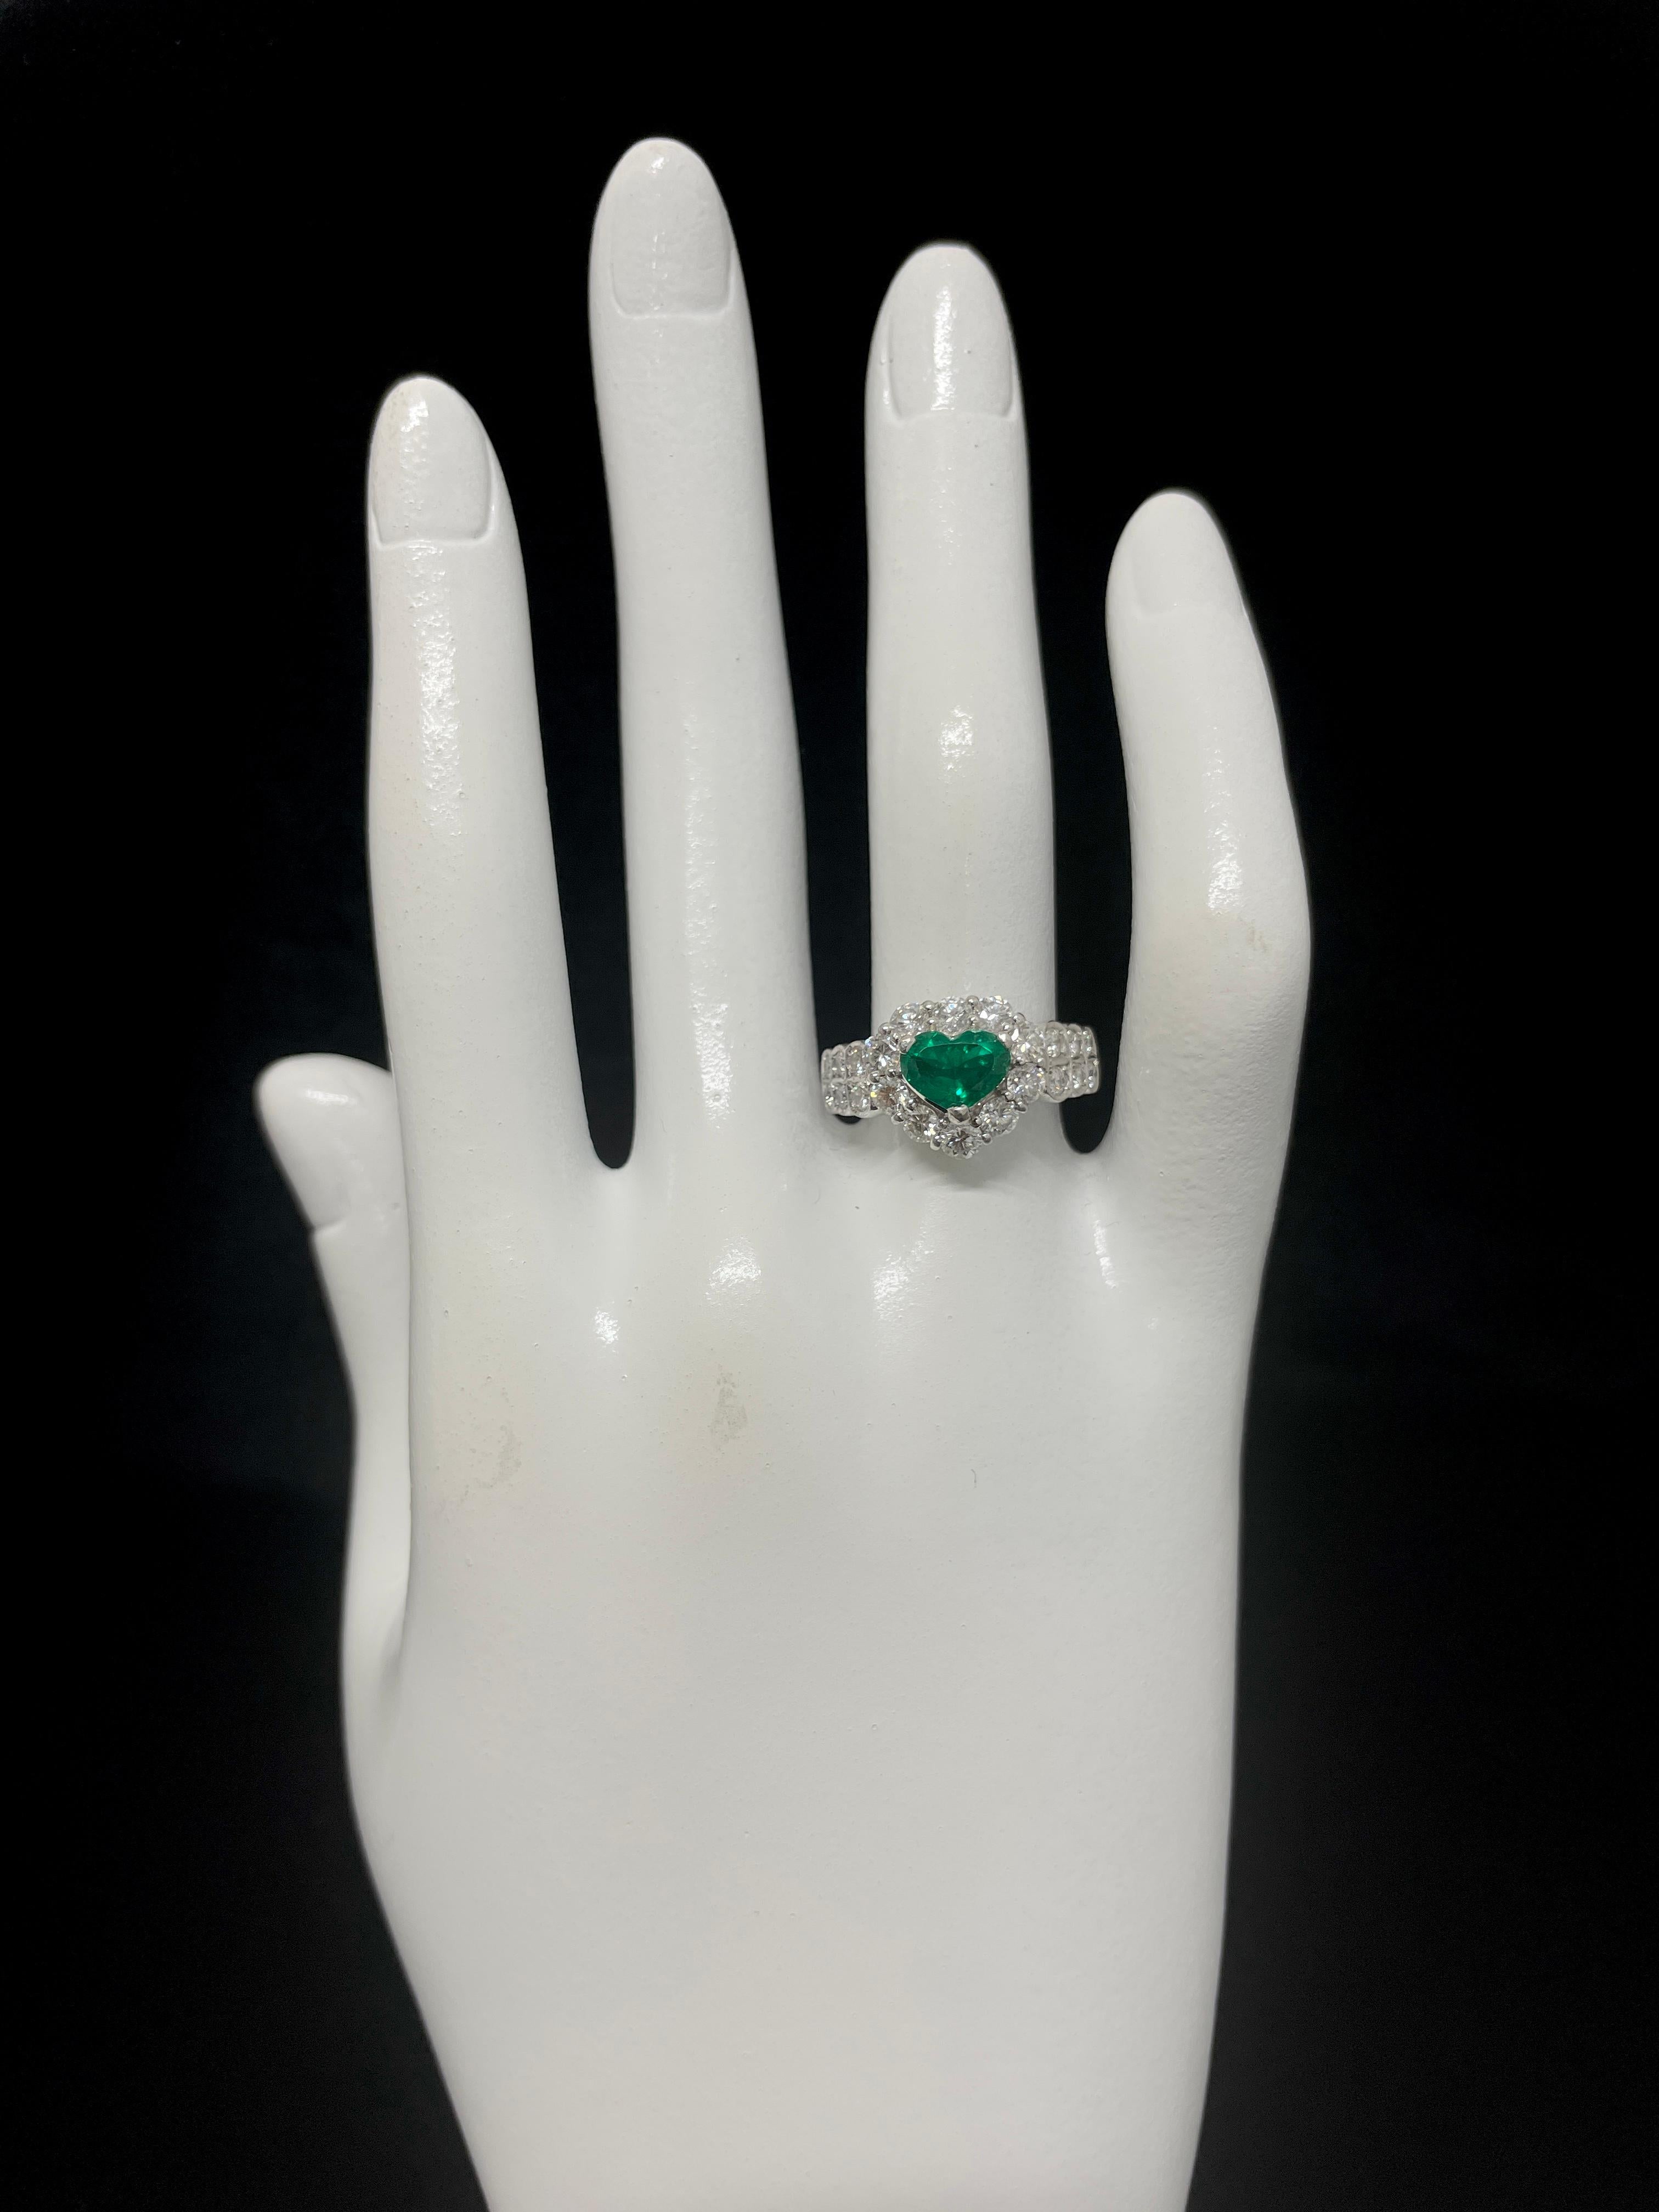 0.85 Carat Natural Heart Cut Emerald and Diamond Halo Ring Set in Platinum 2